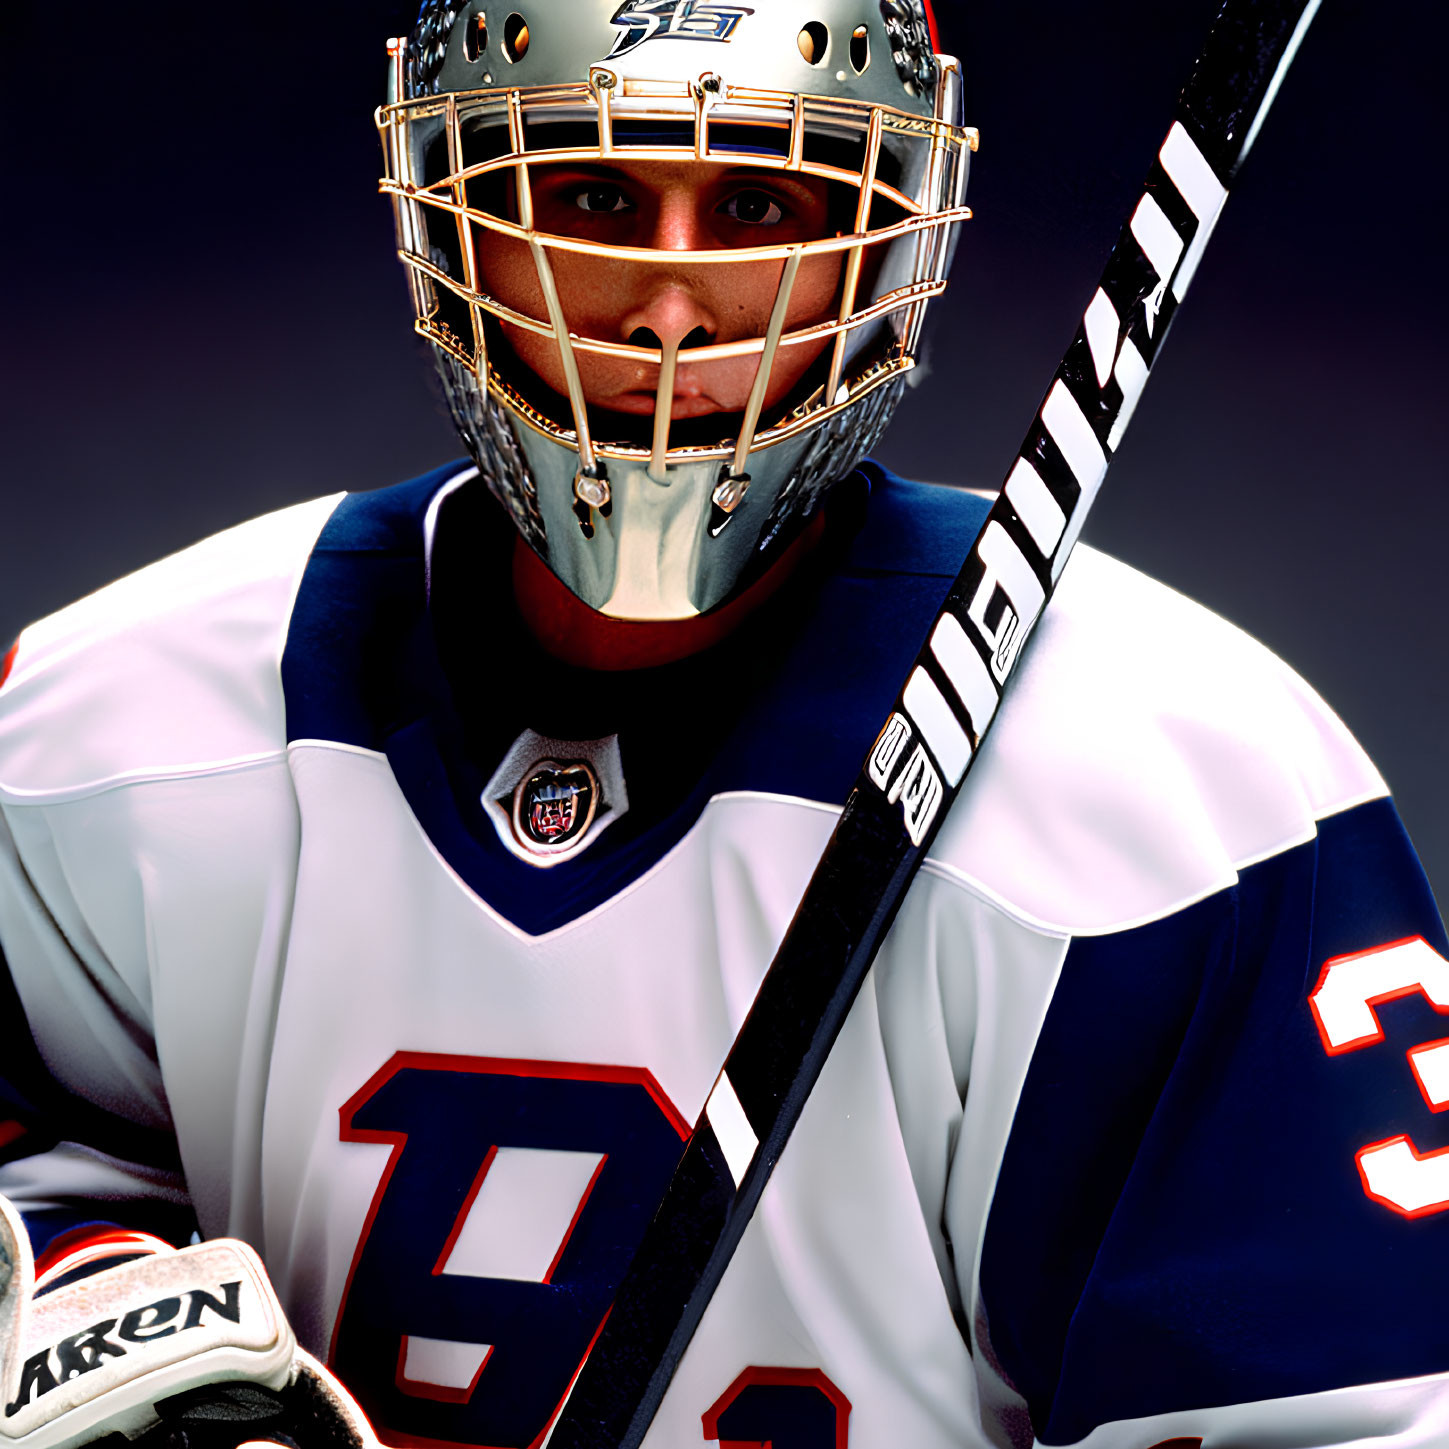 White Jersey Hockey Player Number 35 Holding Stick and Gazing at Camera